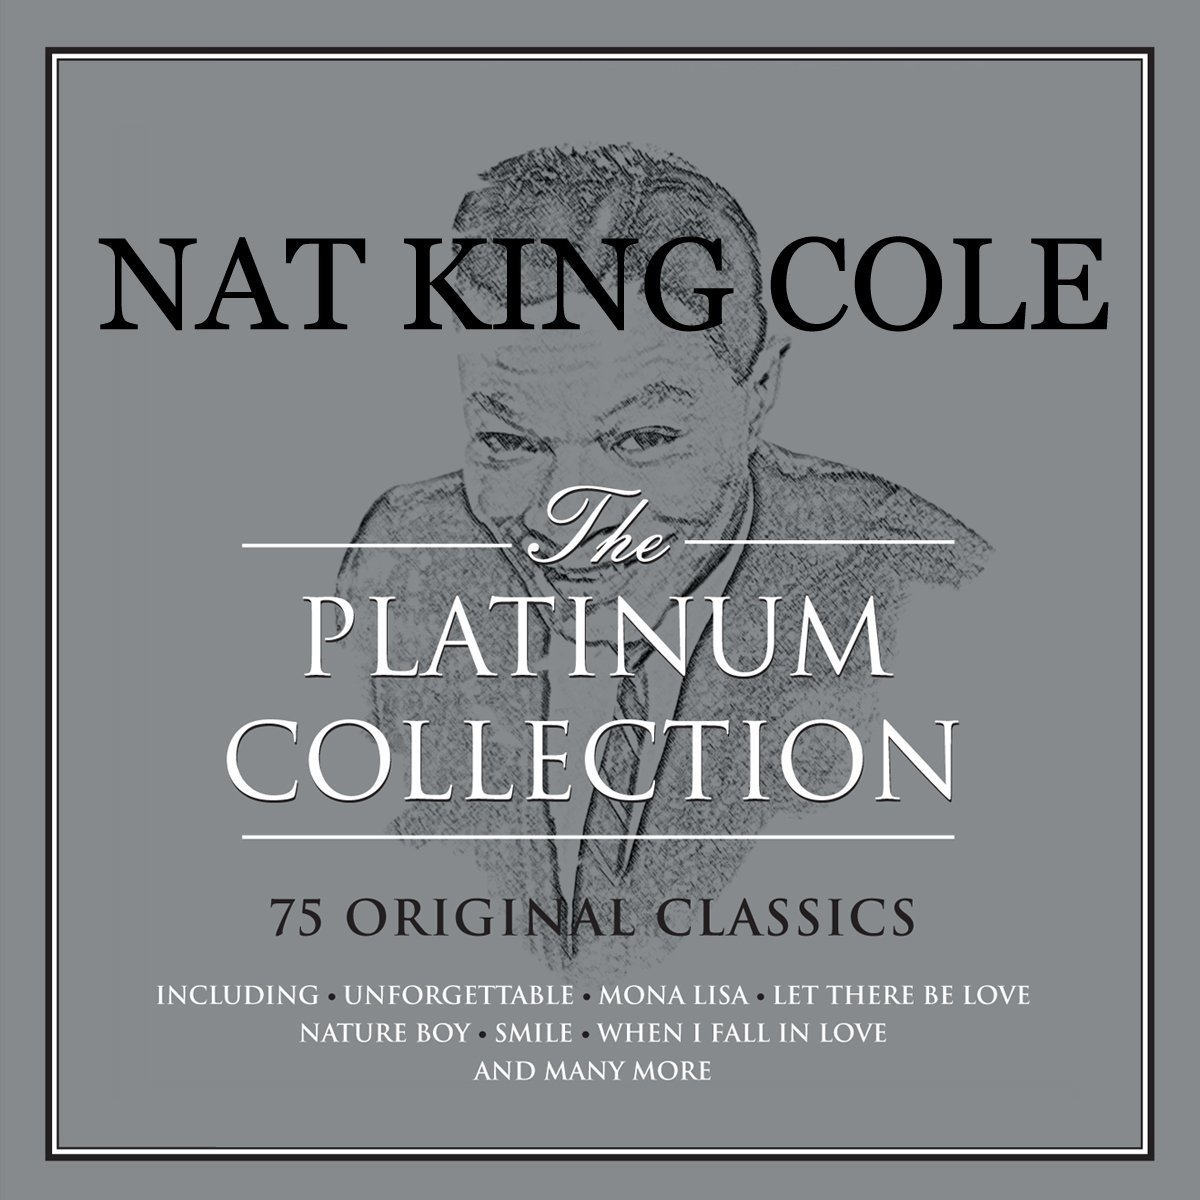 Nat King Cole - The Platinum Collection [3CD Box Set] (Music CD)